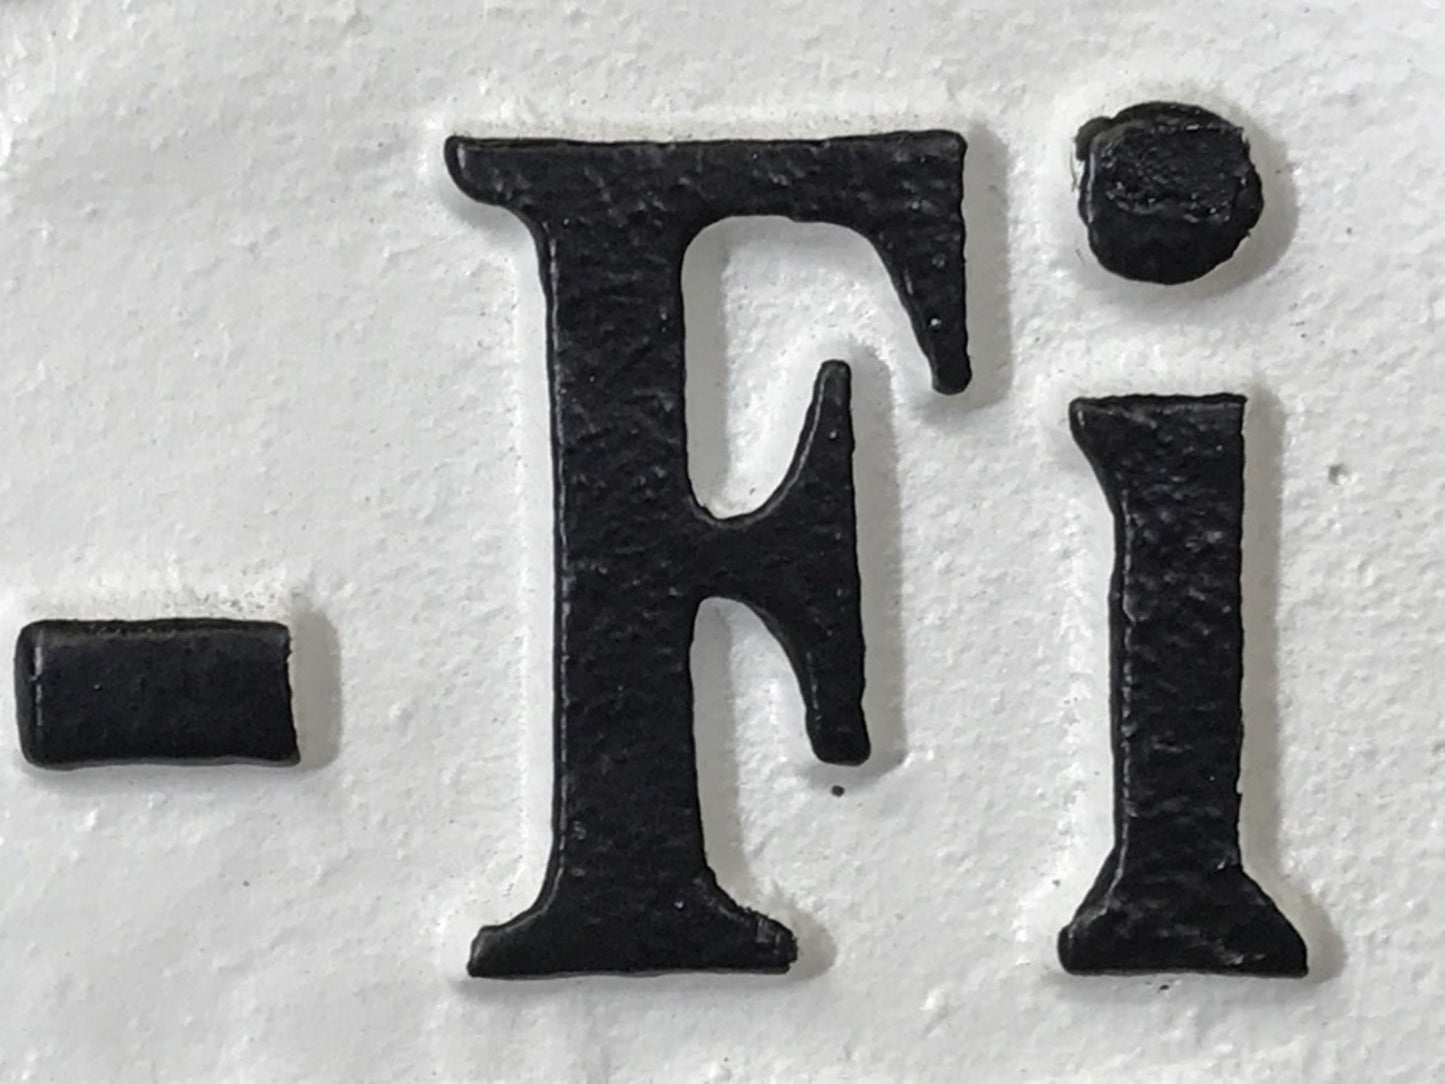 “Wi-Fi Password” White & Black Wall House Office Pub Resturant Sign Cast Iron